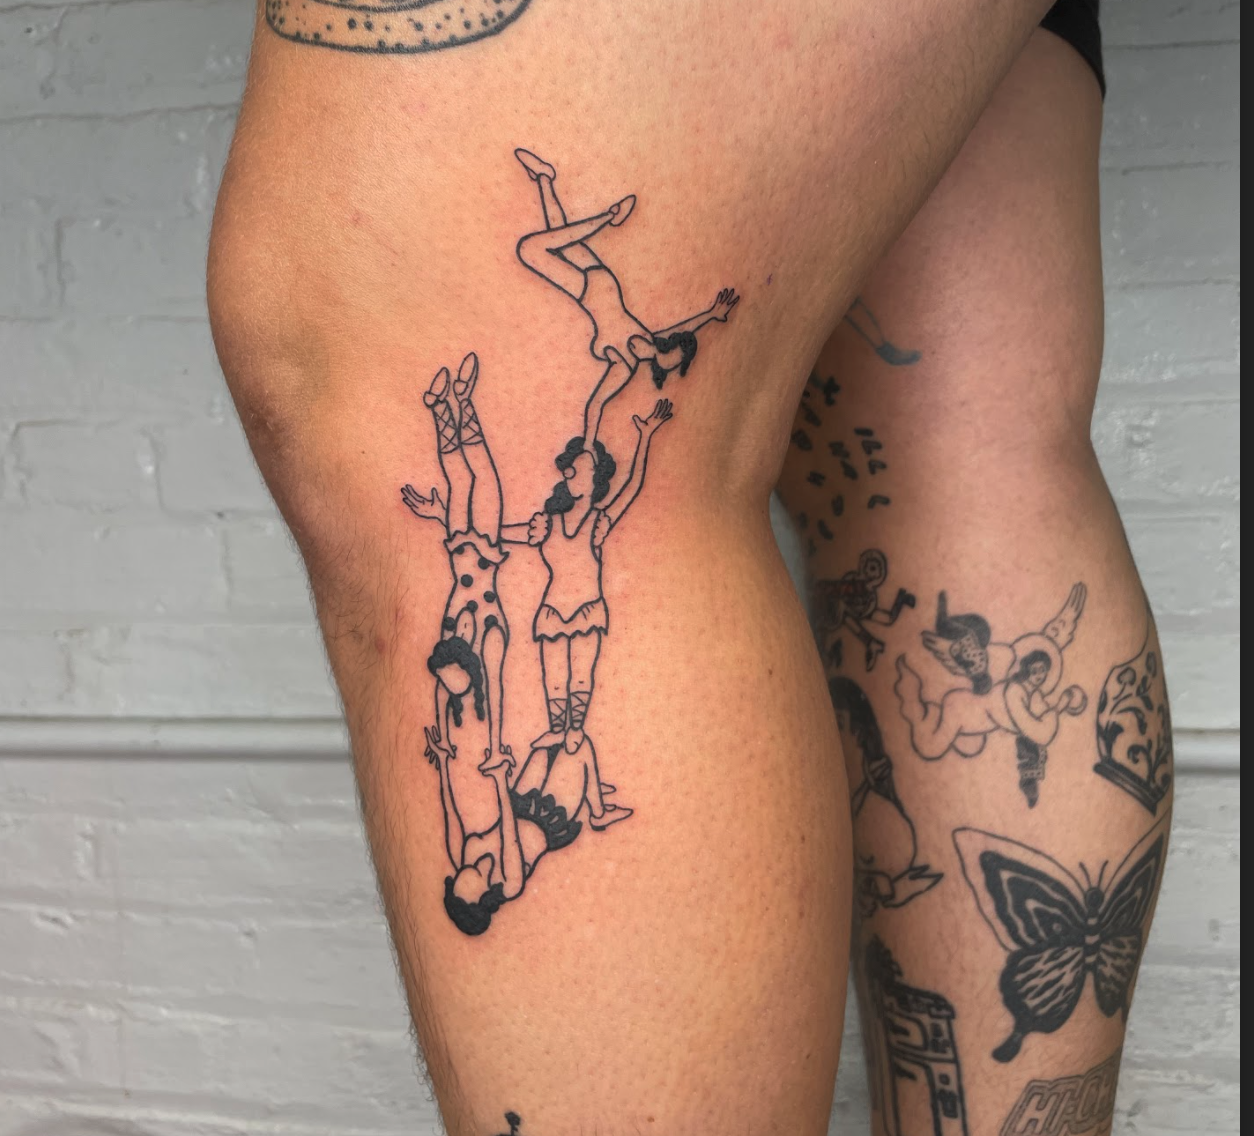 Don Quixote inspired watercolor style tattoo on the